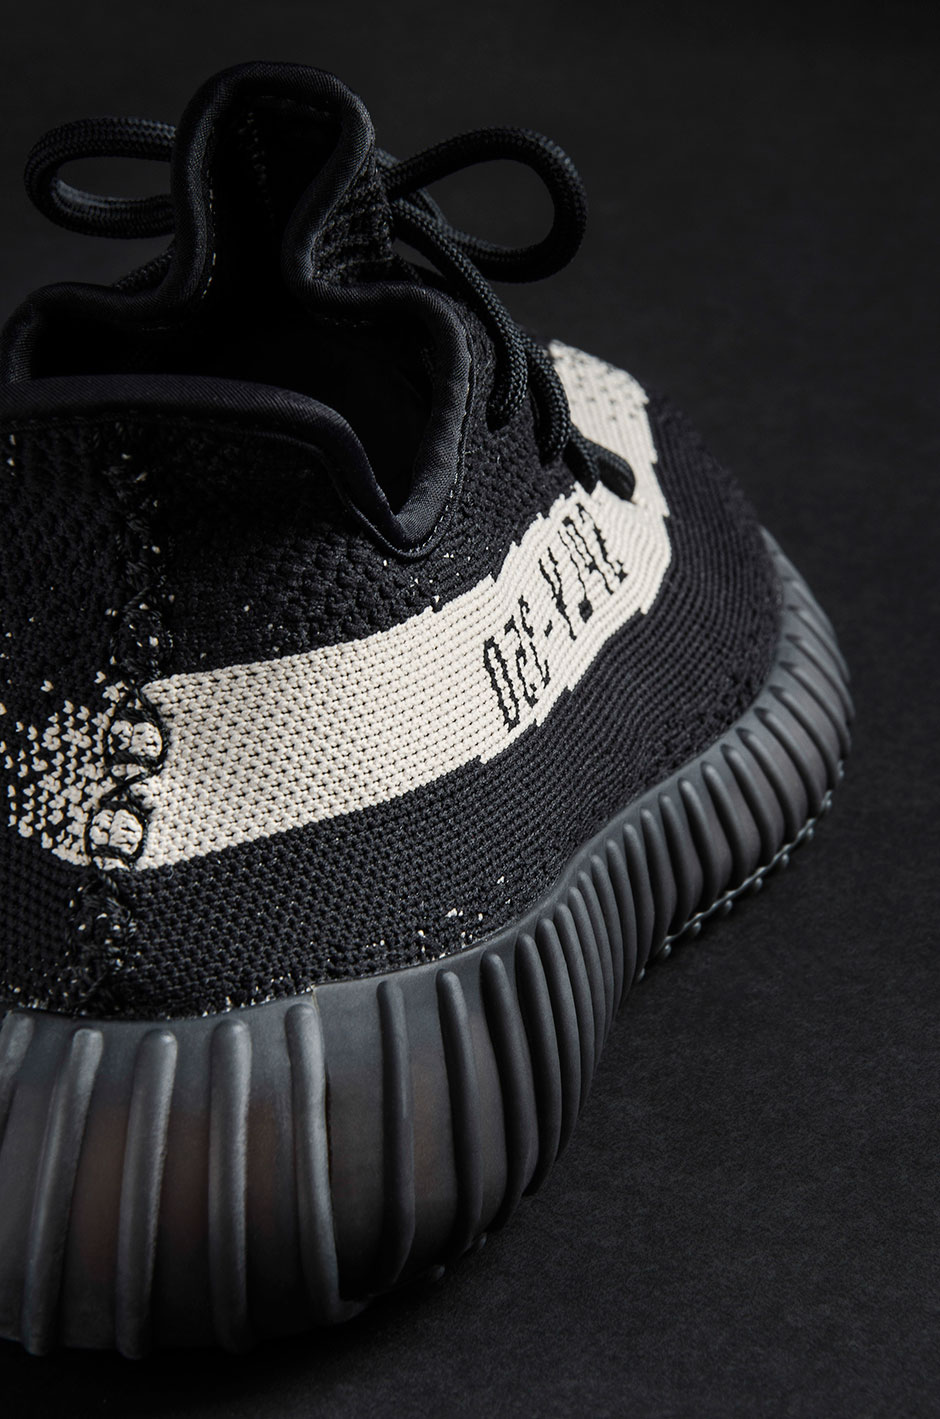 Shop For Yeezy boost 350 v2 fit size black friday At Factory Store